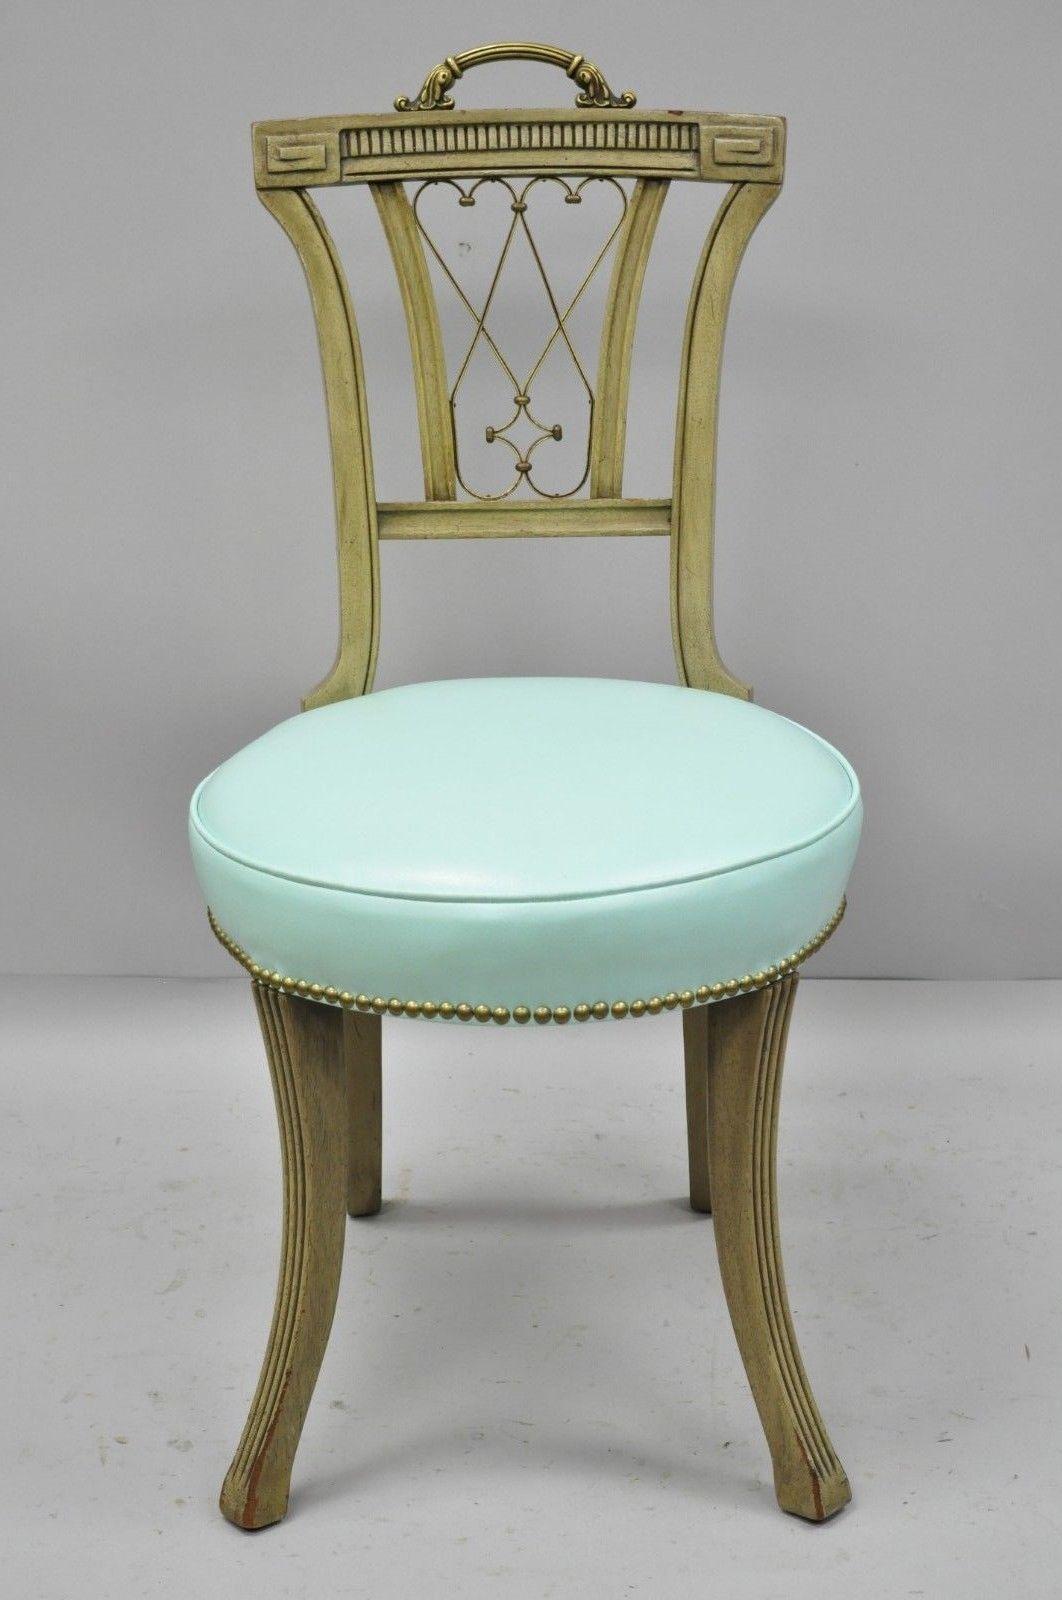 Carved mahogany French Regency style chair with brass handle and aqua blue vinyl (B). Item features ornate brass handle, brass decorated 